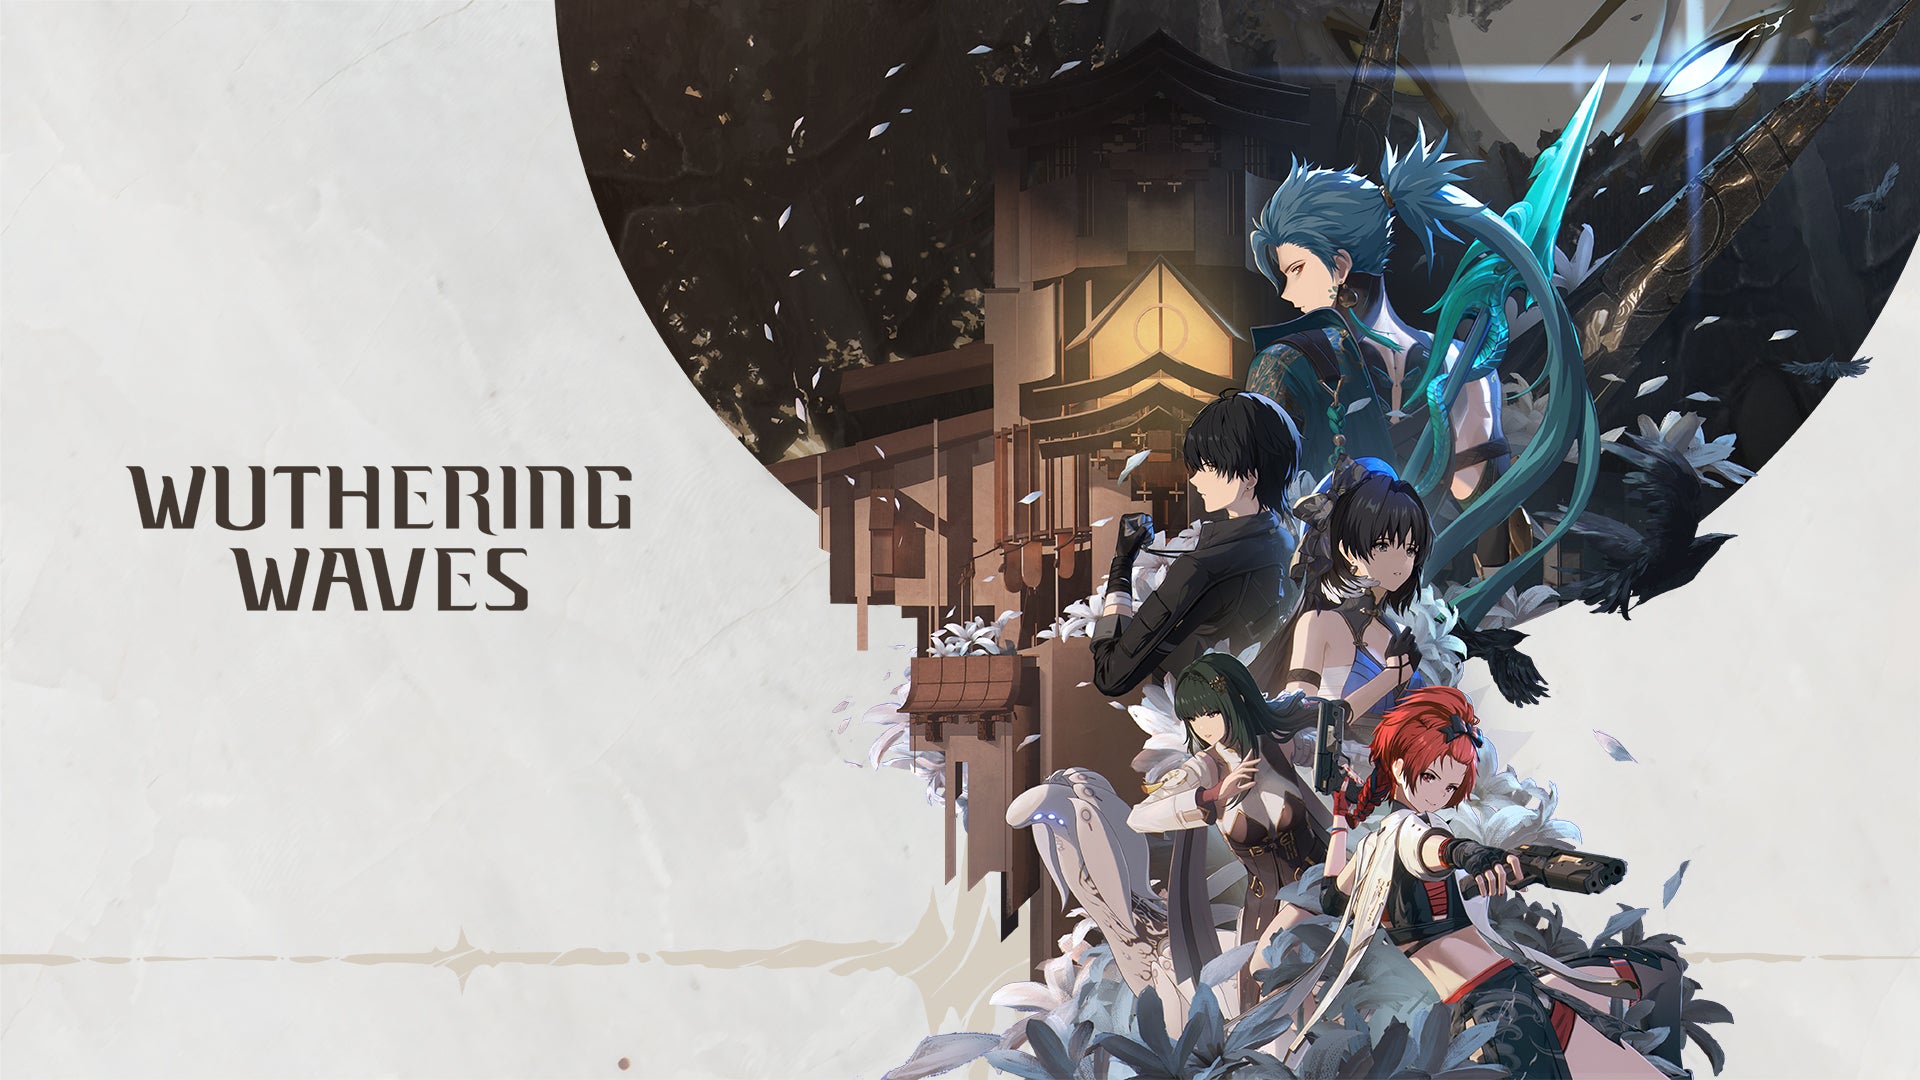 Wuthering Waves, a linear role-playing action game, will be launch on May 22 or PC, Android and iOS